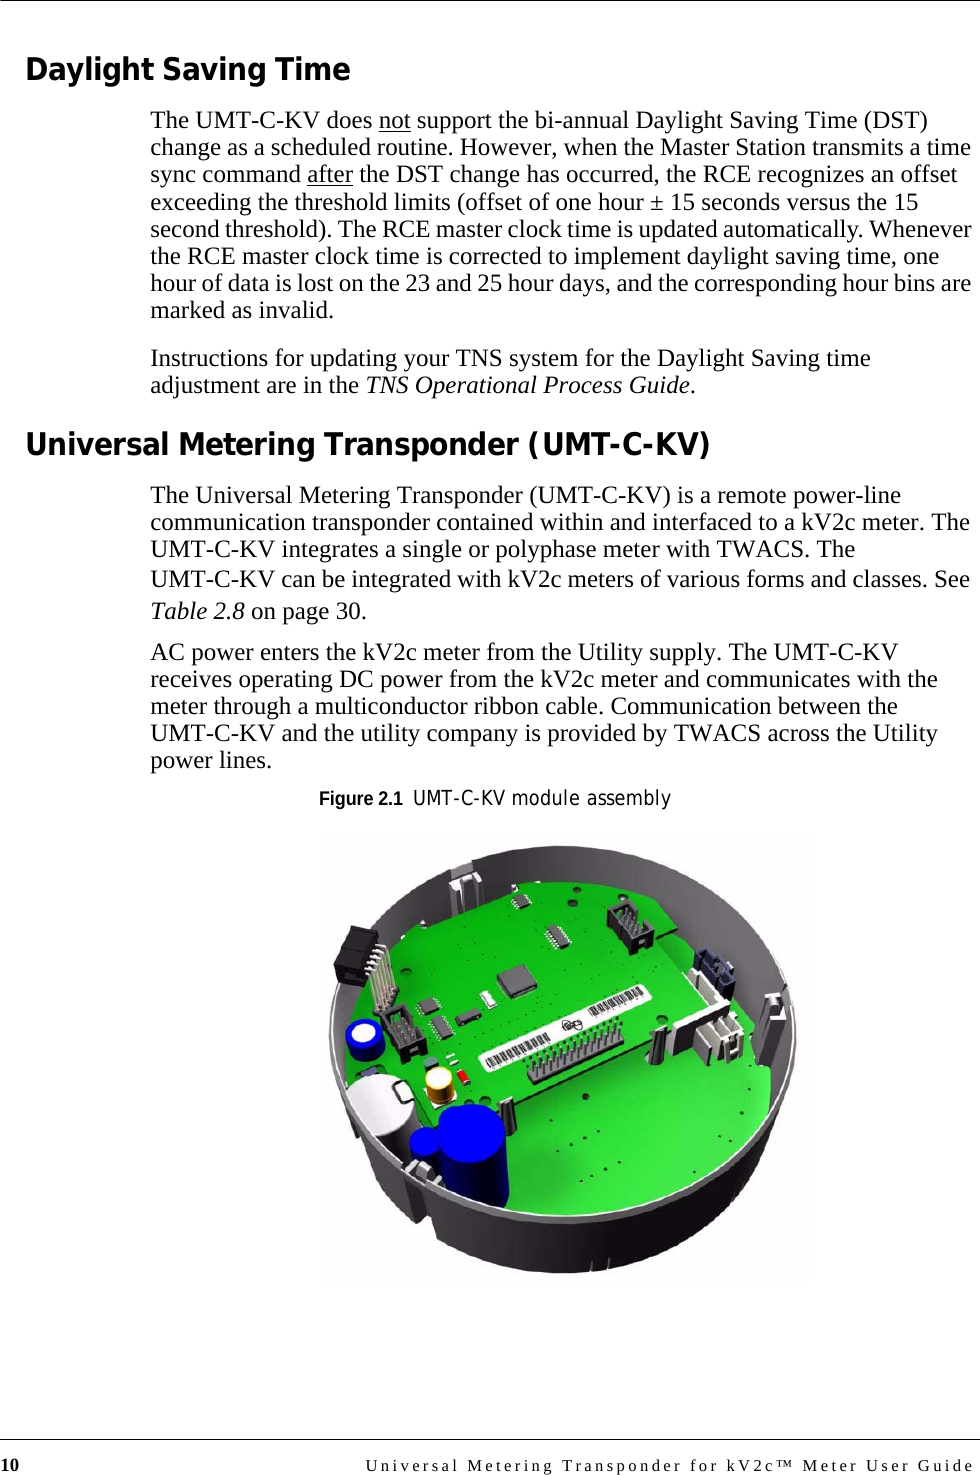 10 Universal Metering Transponder for kV2c™ Meter User GuideDaylight Saving TimeThe UMT-C-KV does not support the bi-annual Daylight Saving Time (DST) change as a scheduled routine. However, when the Master Station transmits a time sync command after the DST change has occurred, the RCE recognizes an offset exceeding the threshold limits (offset of one hour ± 15 seconds versus the 15 second threshold). The RCE master clock time is updated automatically. Whenever the RCE master clock time is corrected to implement daylight saving time, one hour of data is lost on the 23 and 25 hour days, and the corresponding hour bins are marked as invalid.Instructions for updating your TNS system for the Daylight Saving time adjustment are in the TNS Operational Process Guide.Universal Metering Transponder (UMT-C-KV)The Universal Metering Transponder (UMT-C-KV) is a remote power-line communication transponder contained within and interfaced to a kV2c meter. The UMT-C-KV integrates a single or polyphase meter with TWACS. The UMT-C-KV can be integrated with kV2c meters of various forms and classes. See Table 2.8 on page 30. AC power enters the kV2c meter from the Utility supply. The UMT-C-KV receives operating DC power from the kV2c meter and communicates with the meter through a multiconductor ribbon cable. Communication between the UMT-C-KV and the utility company is provided by TWACS across the Utility power lines.Figure 2.1  UMT-C-KV module assembly